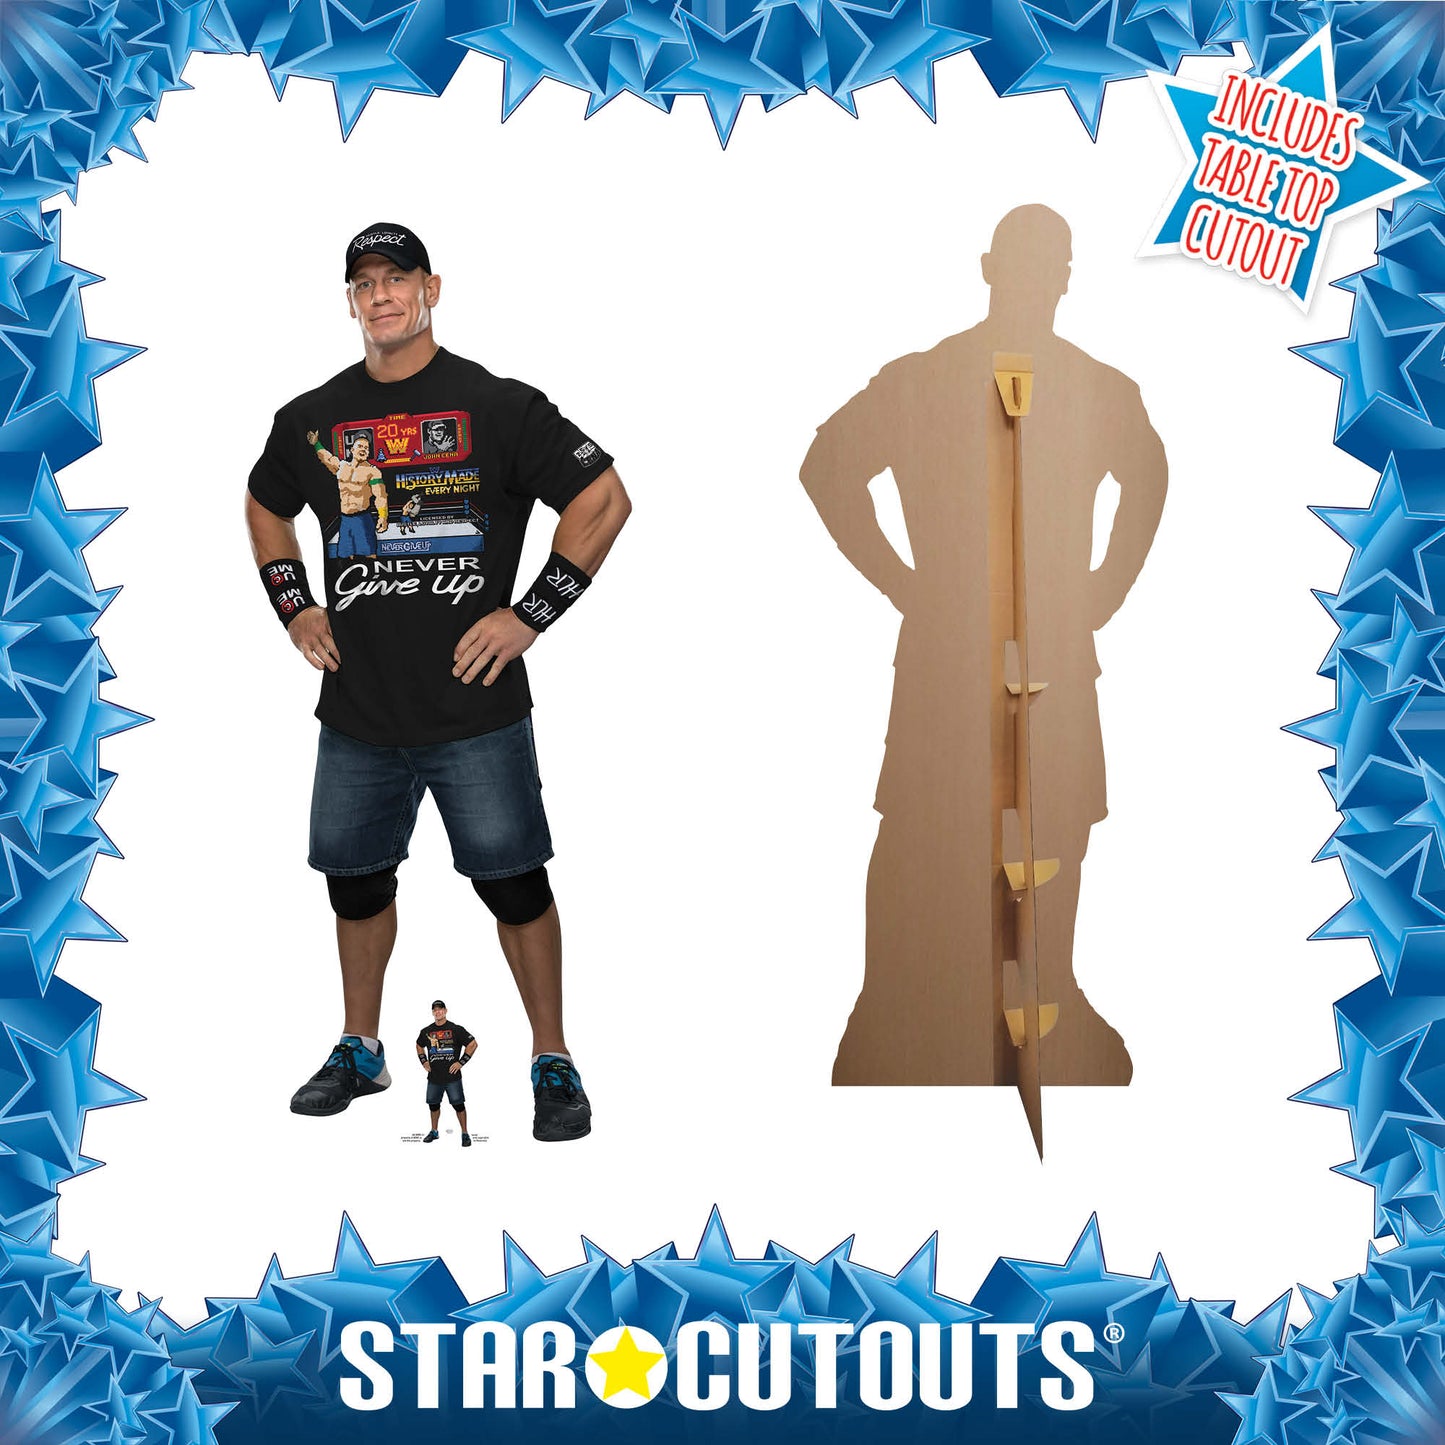 SC4158 John Cena Black Outfit WWE Cardboard Cut Out Height 186cm